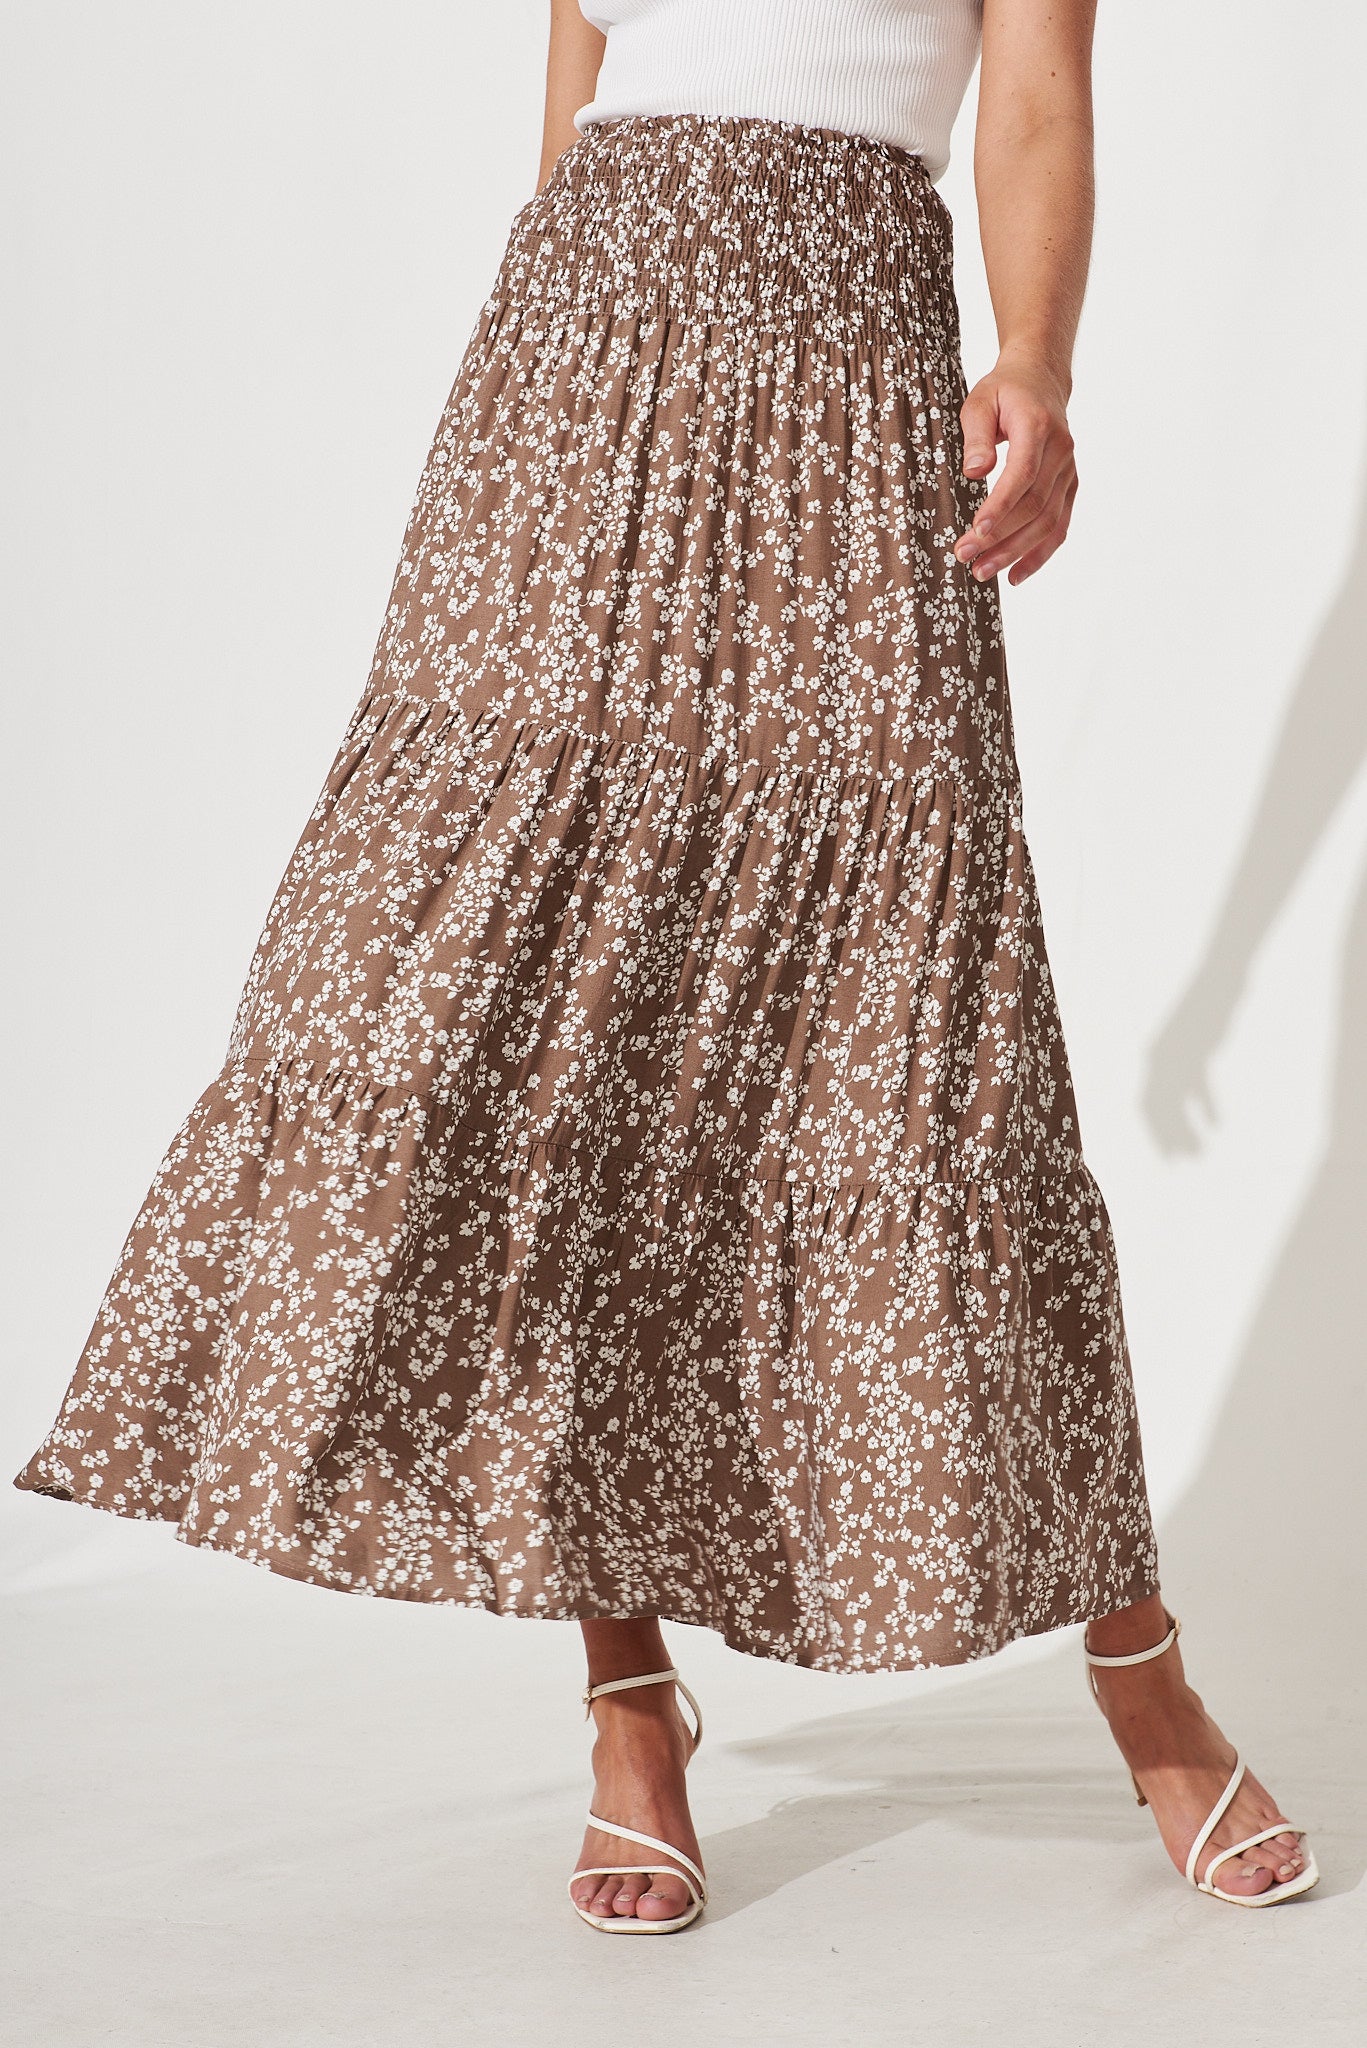 Macarena Maxi Skirt In Mocha With White Floral Skirt - front